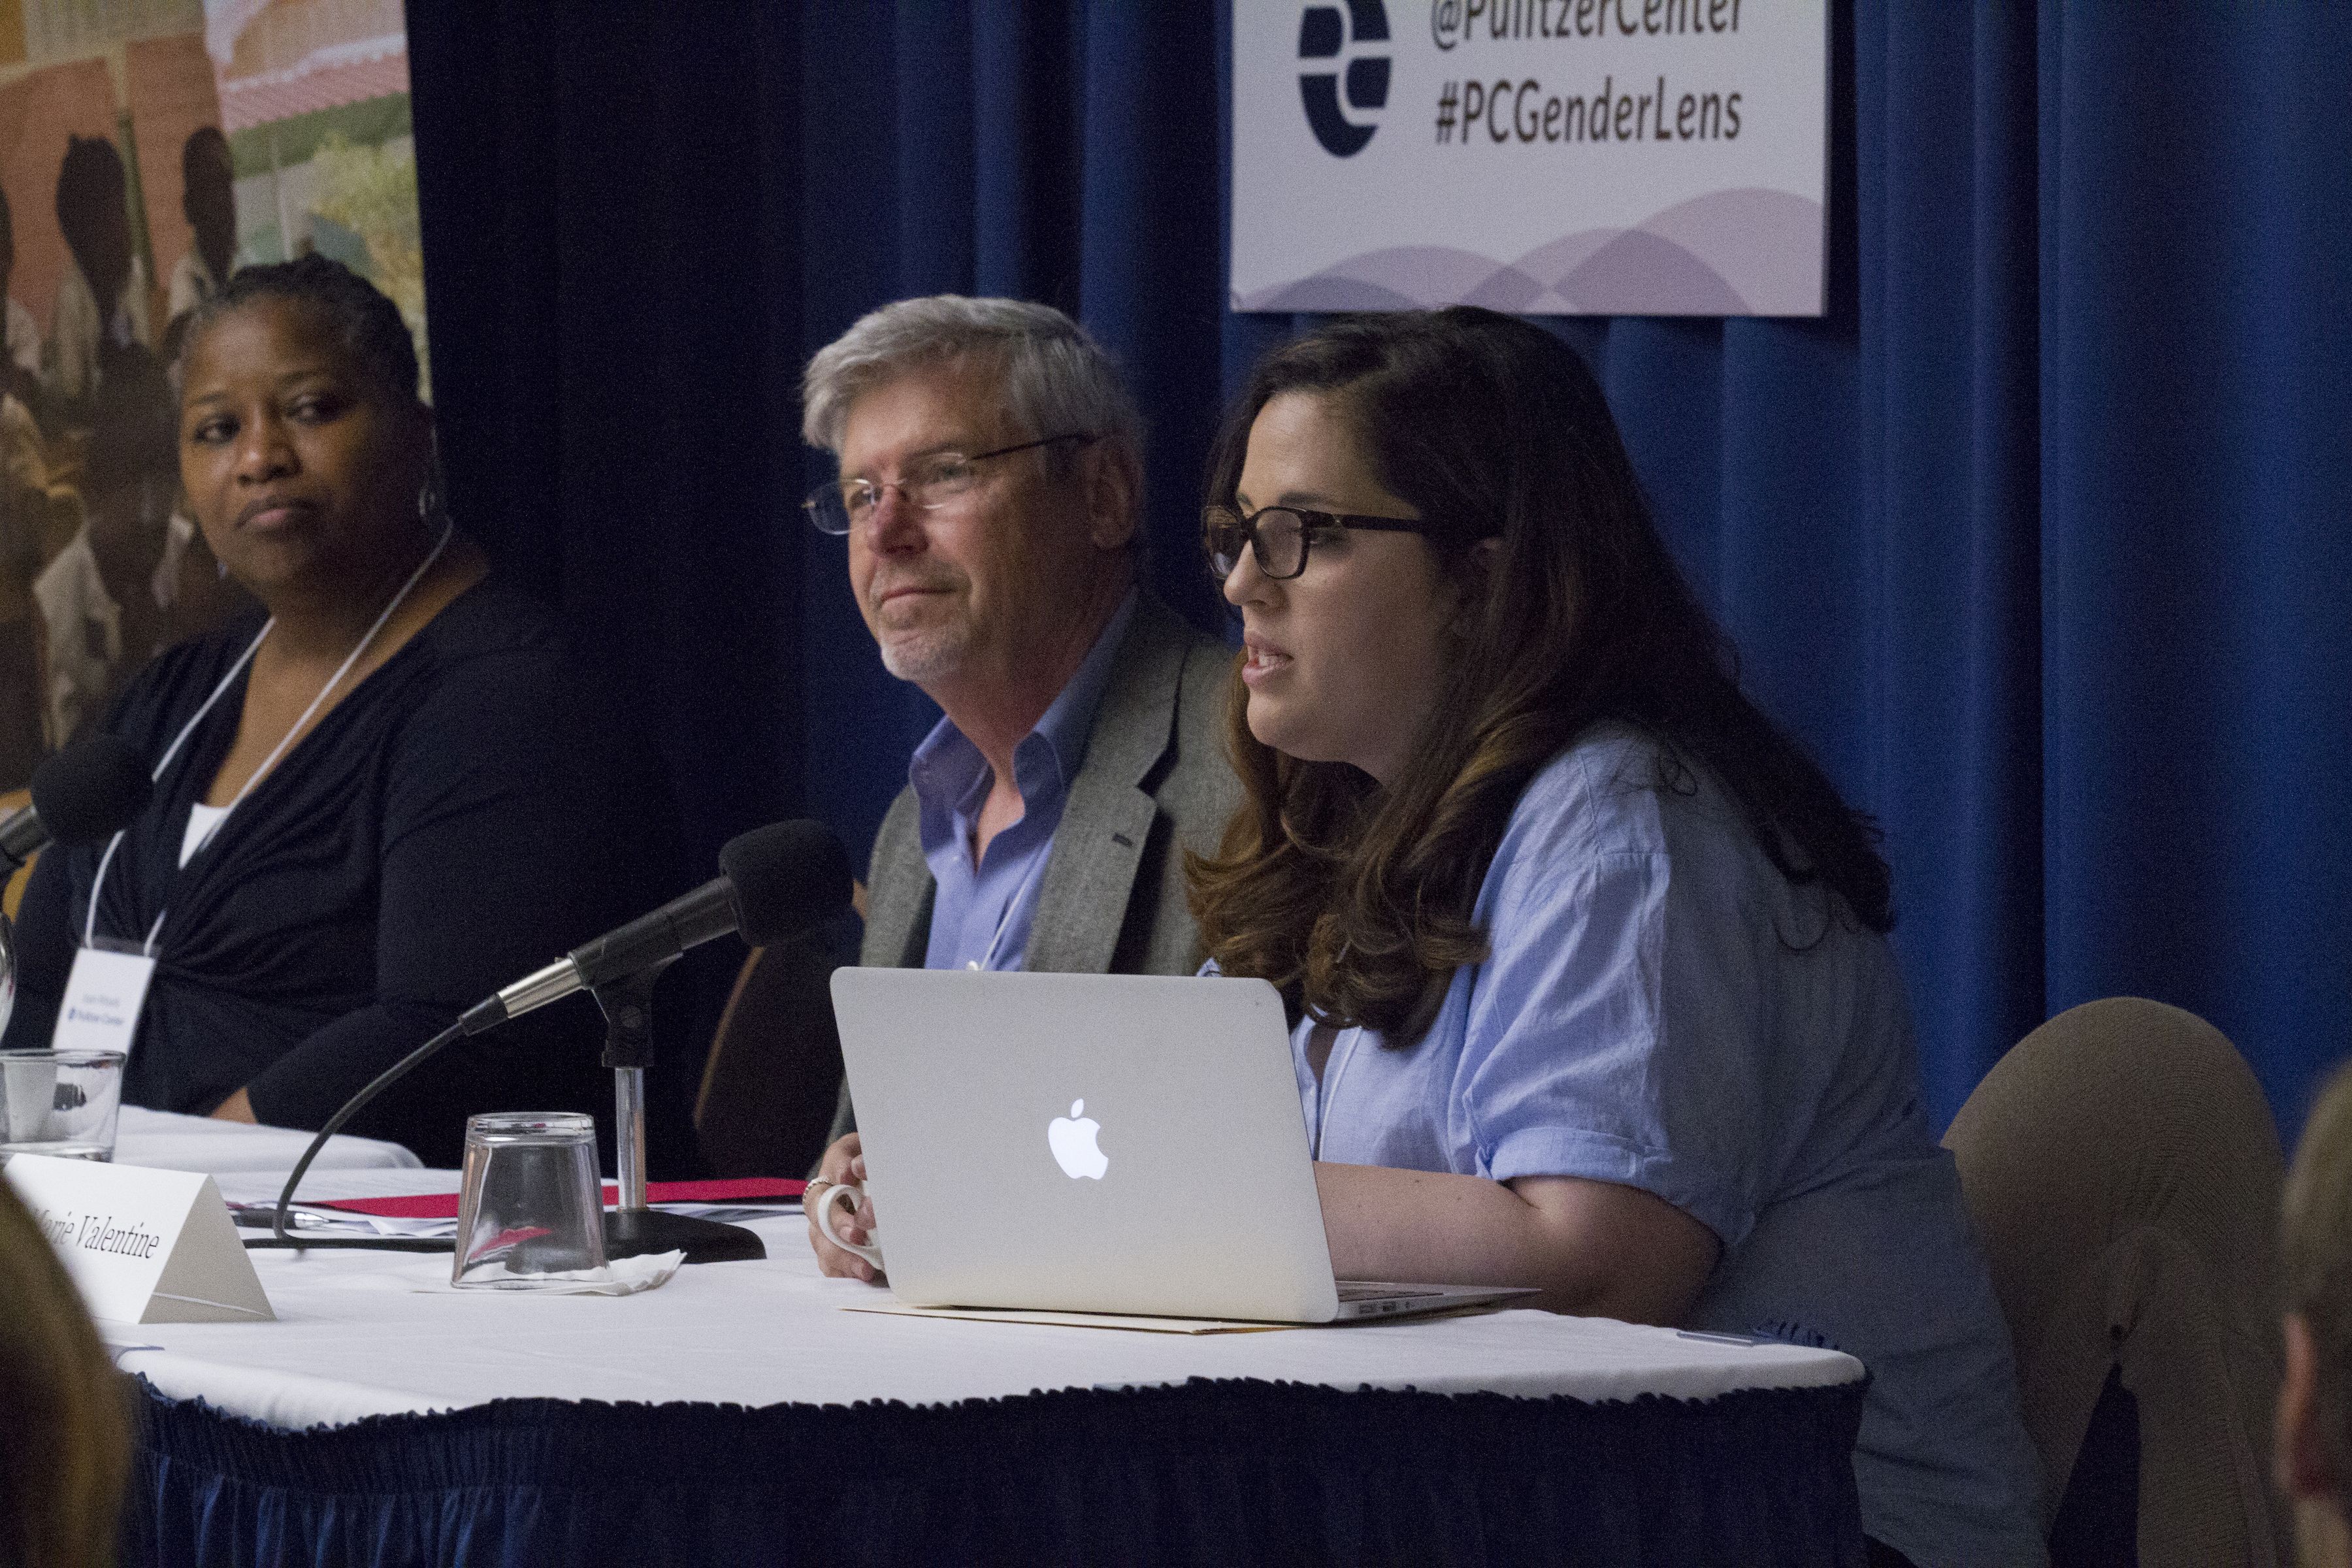 From left, Pulitzer Center Capital Campaign Director Joan Woods, Senior Editor Tom Hundley, and International Women's Media Foundation Senior Program Officer Ann Marie Valentine at the 2017 Pulitzer Center Gender Lens Conference workshop on pitching and funding proposals. Image by Jin Ding. United States, 2017.